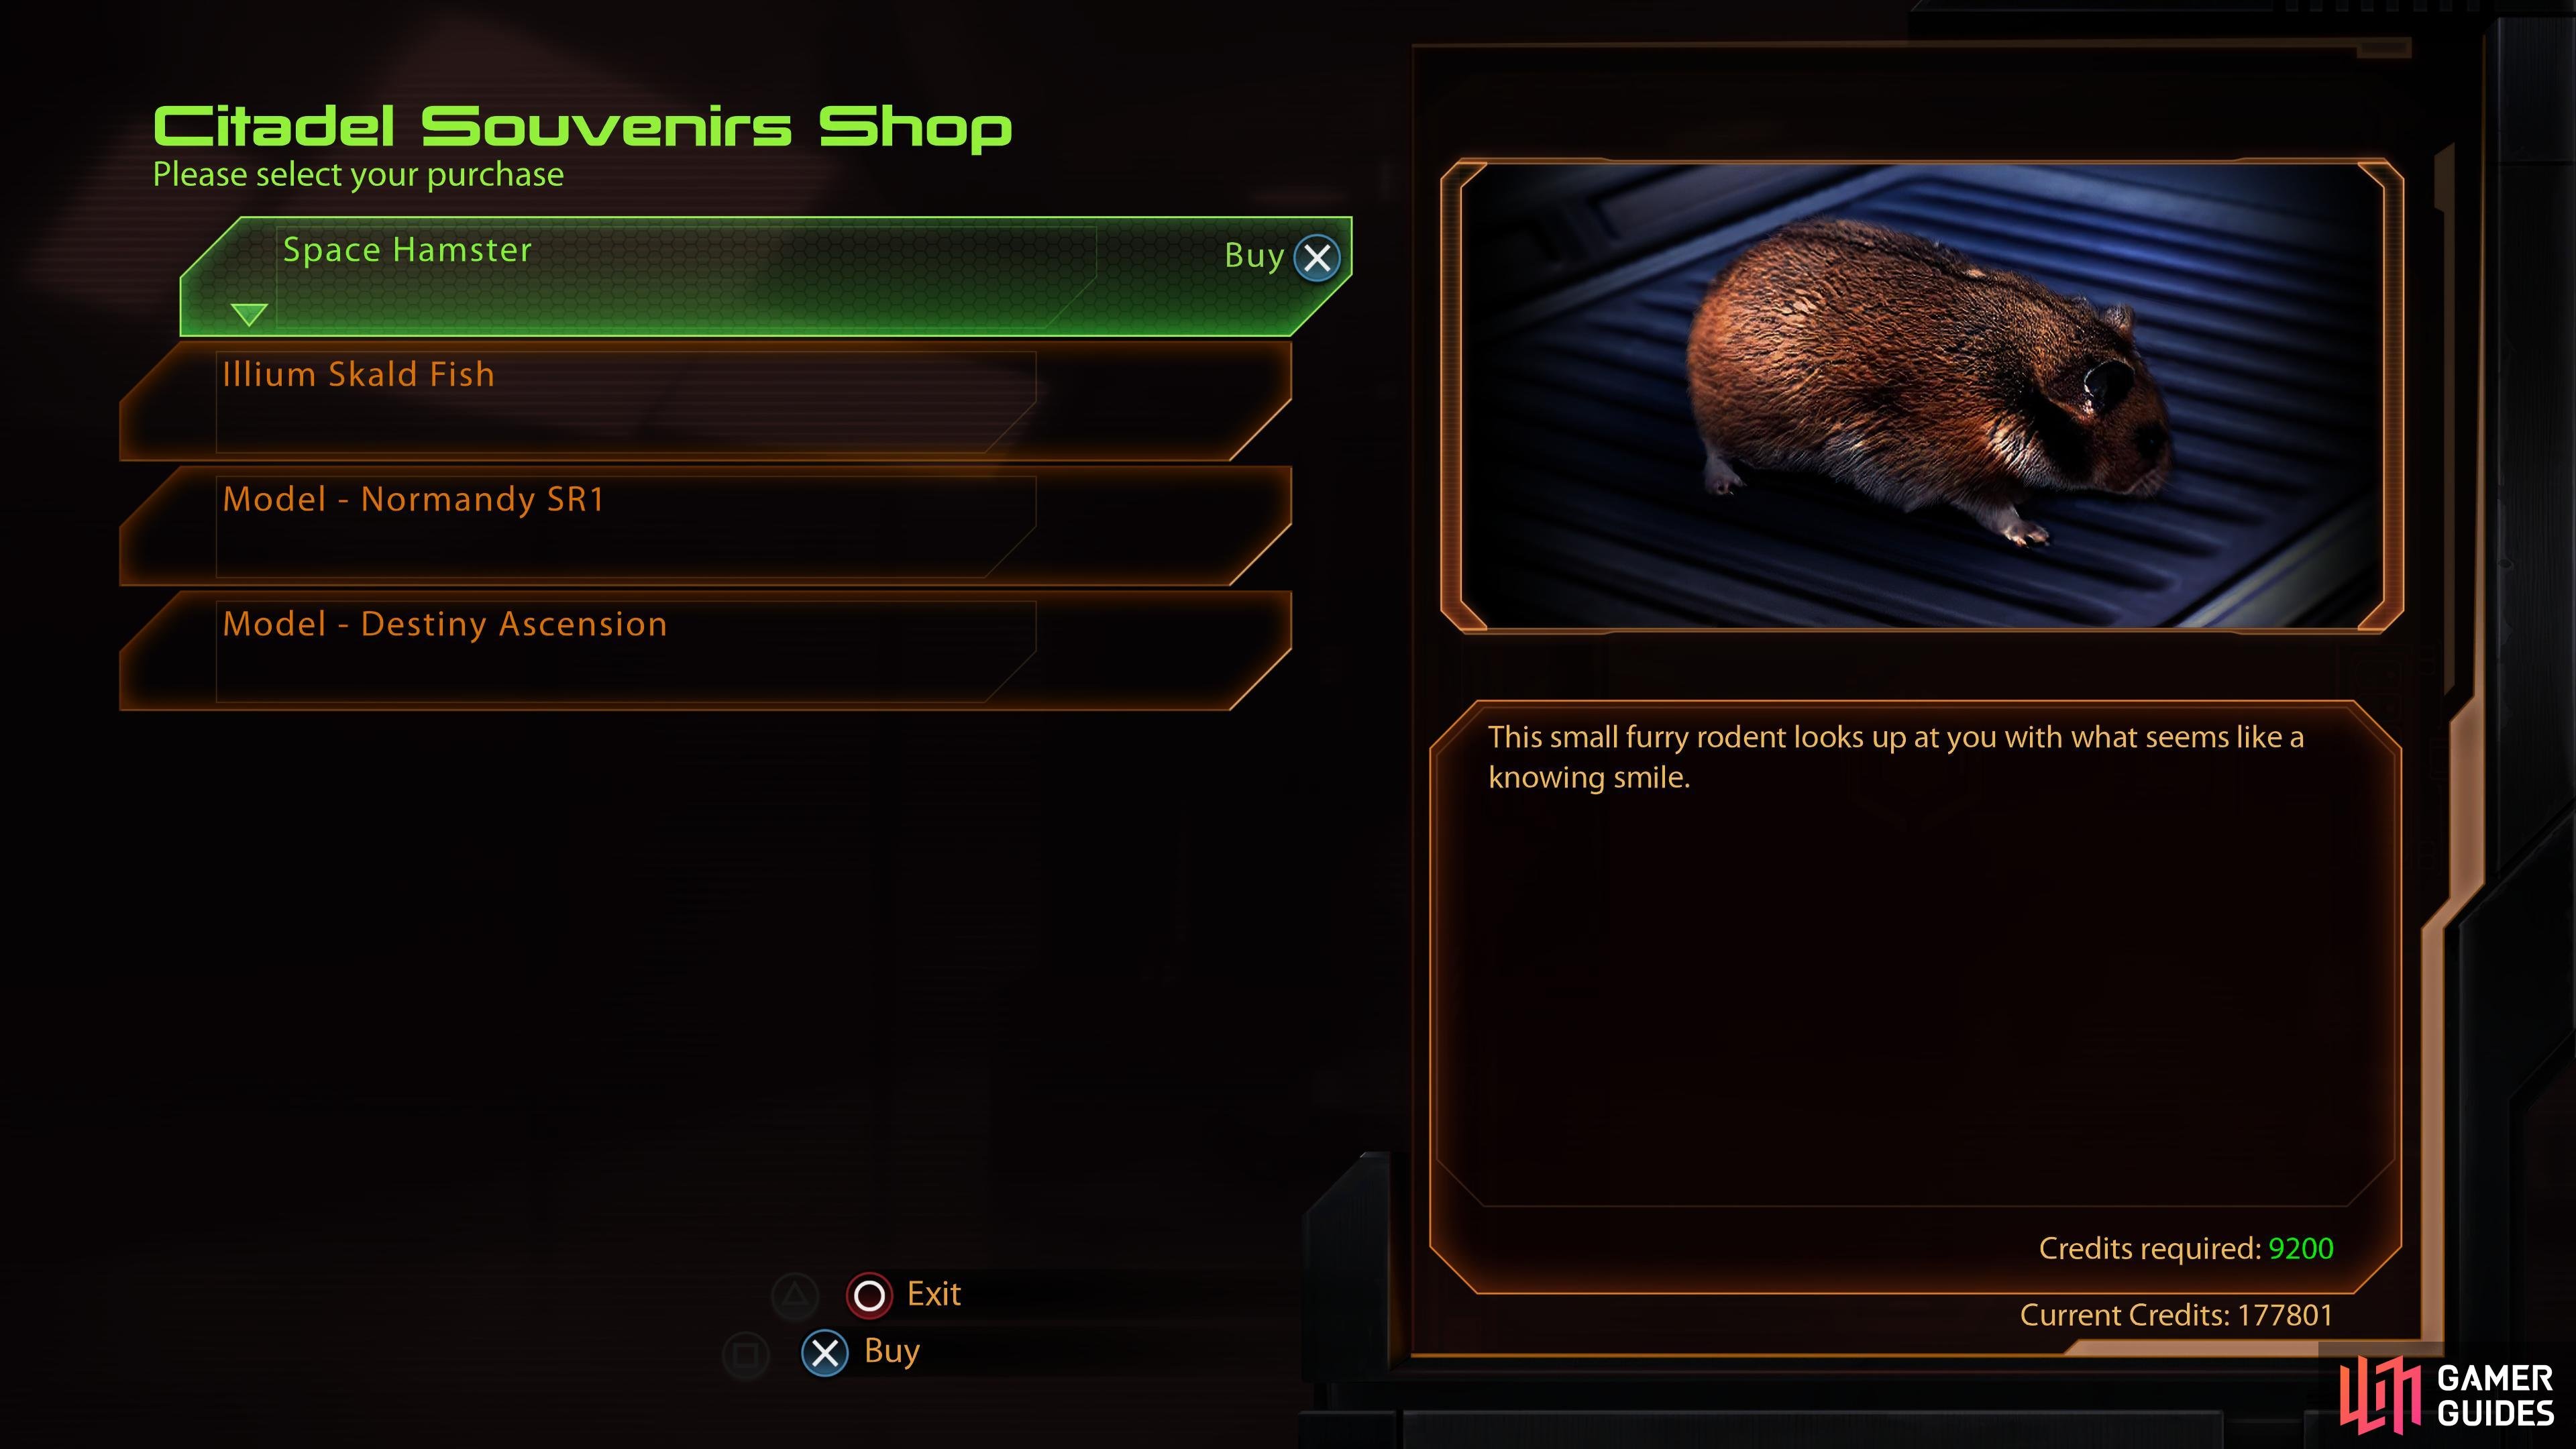 where you can pick up a variety of collectibles - including the Space Hamster.